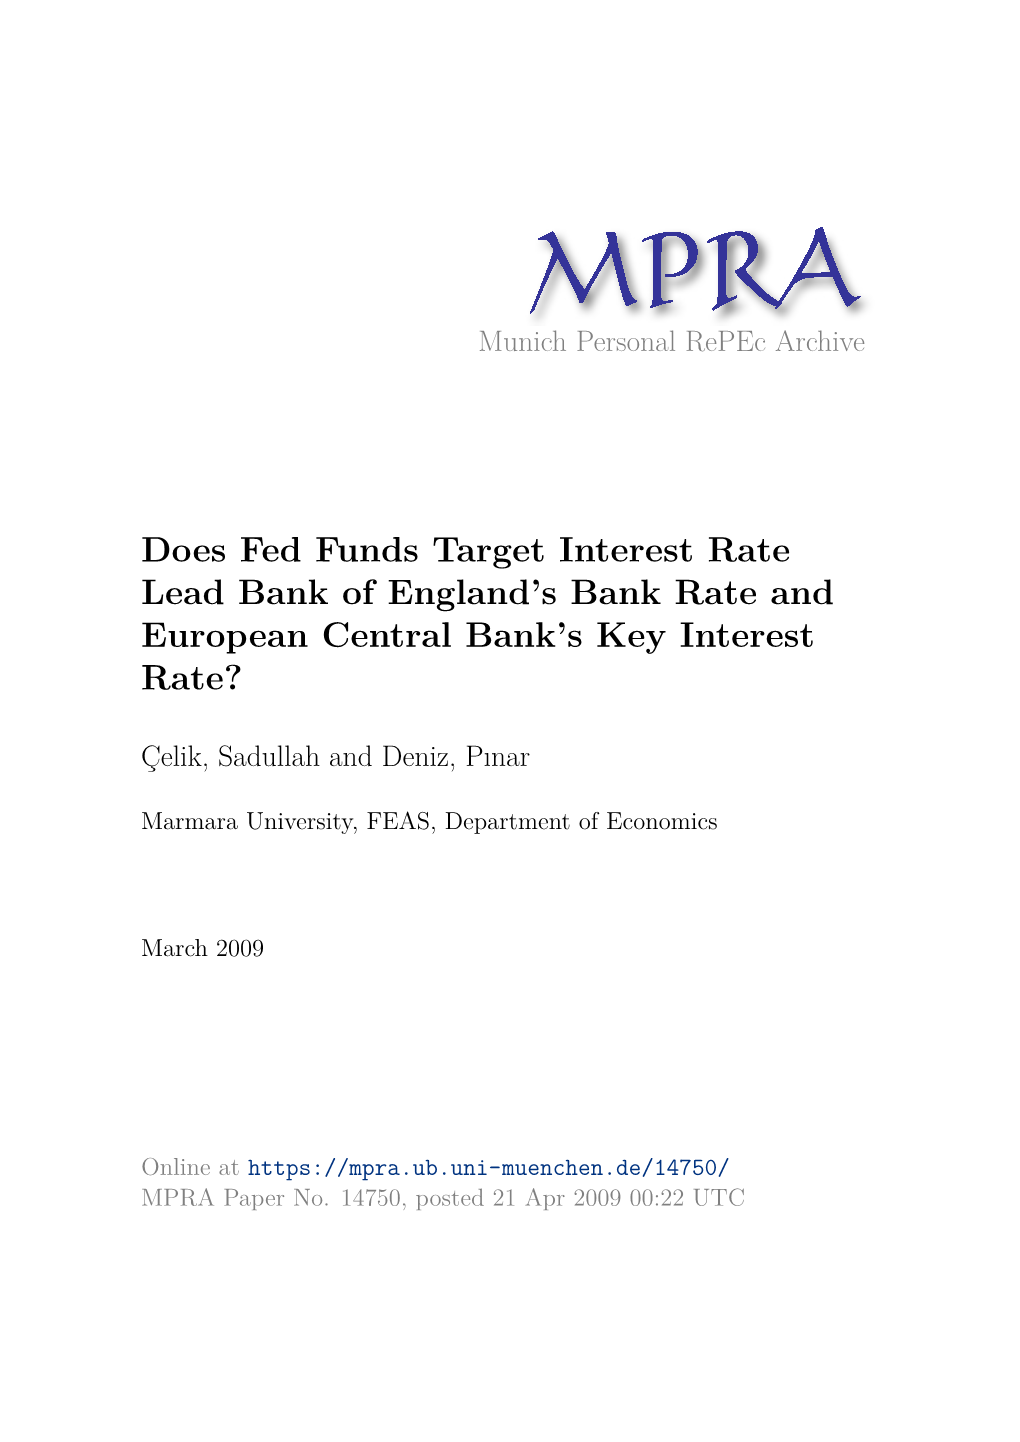 Does Fed Funds Target Interest Rate Lead Bank of England's Bank Rate